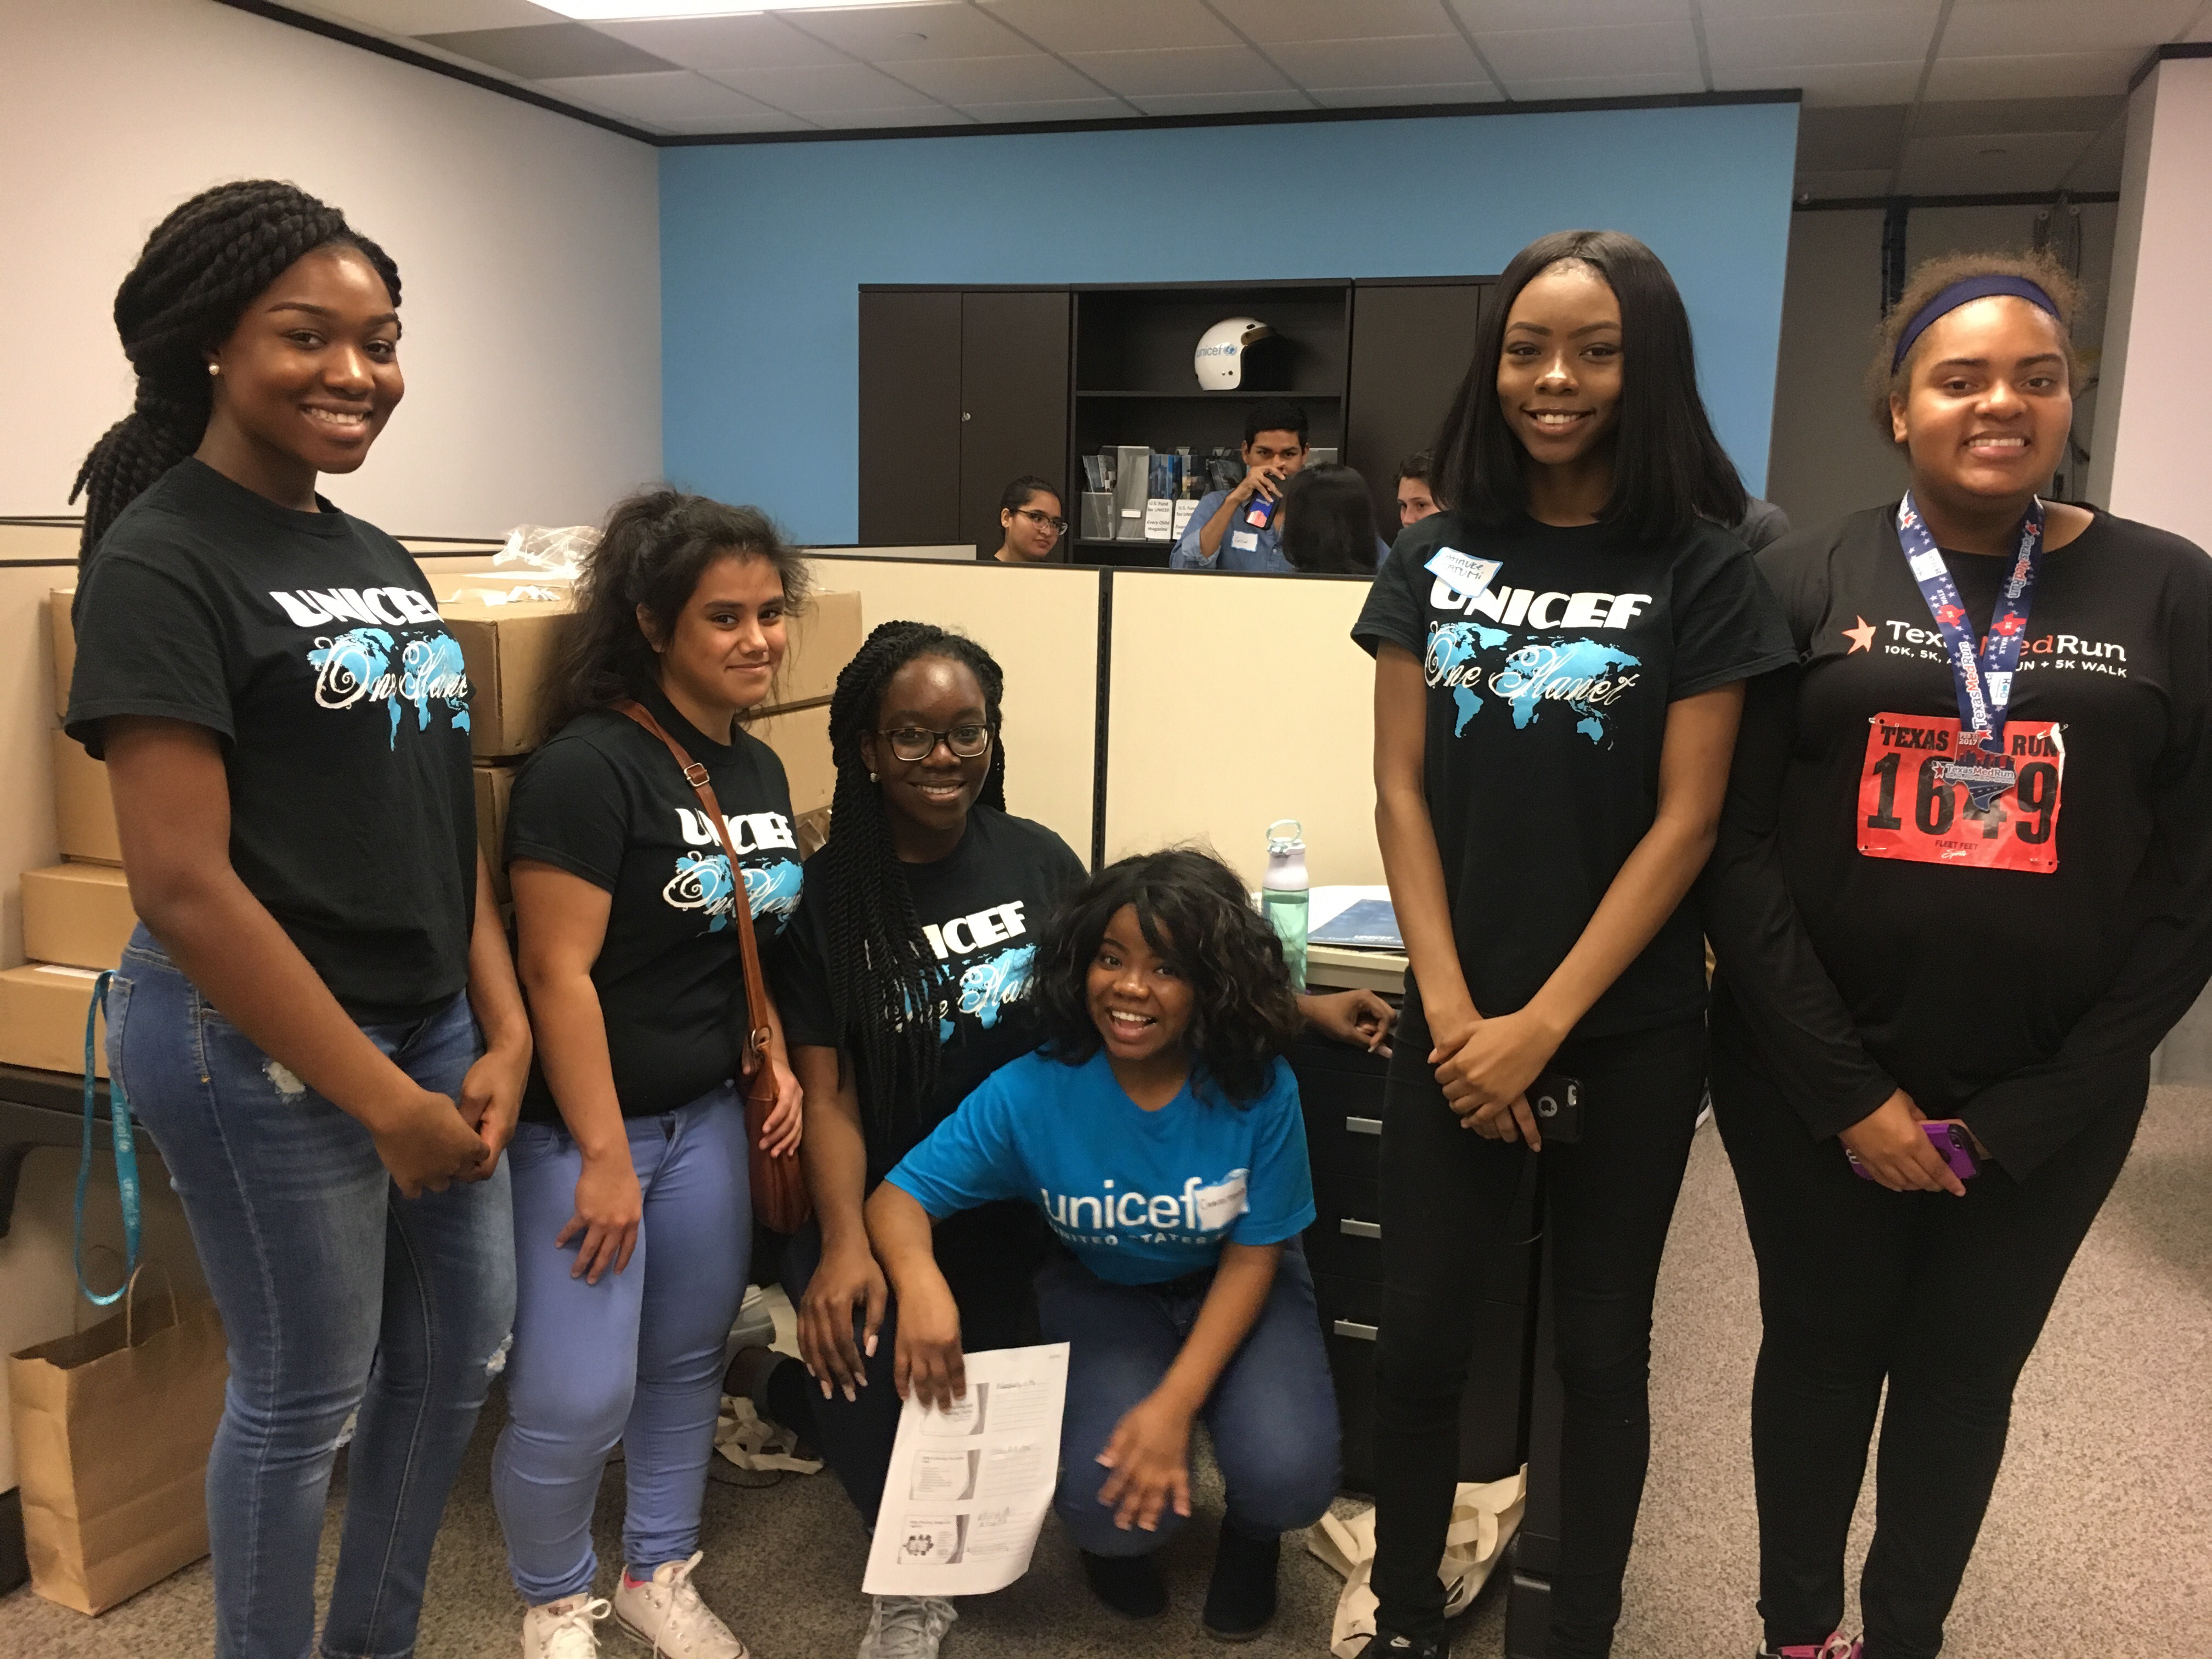 Students from George Bush High School share upcoming UNICEF Club events with their peers at the Spring 2017 UNICEF Club Retreat.